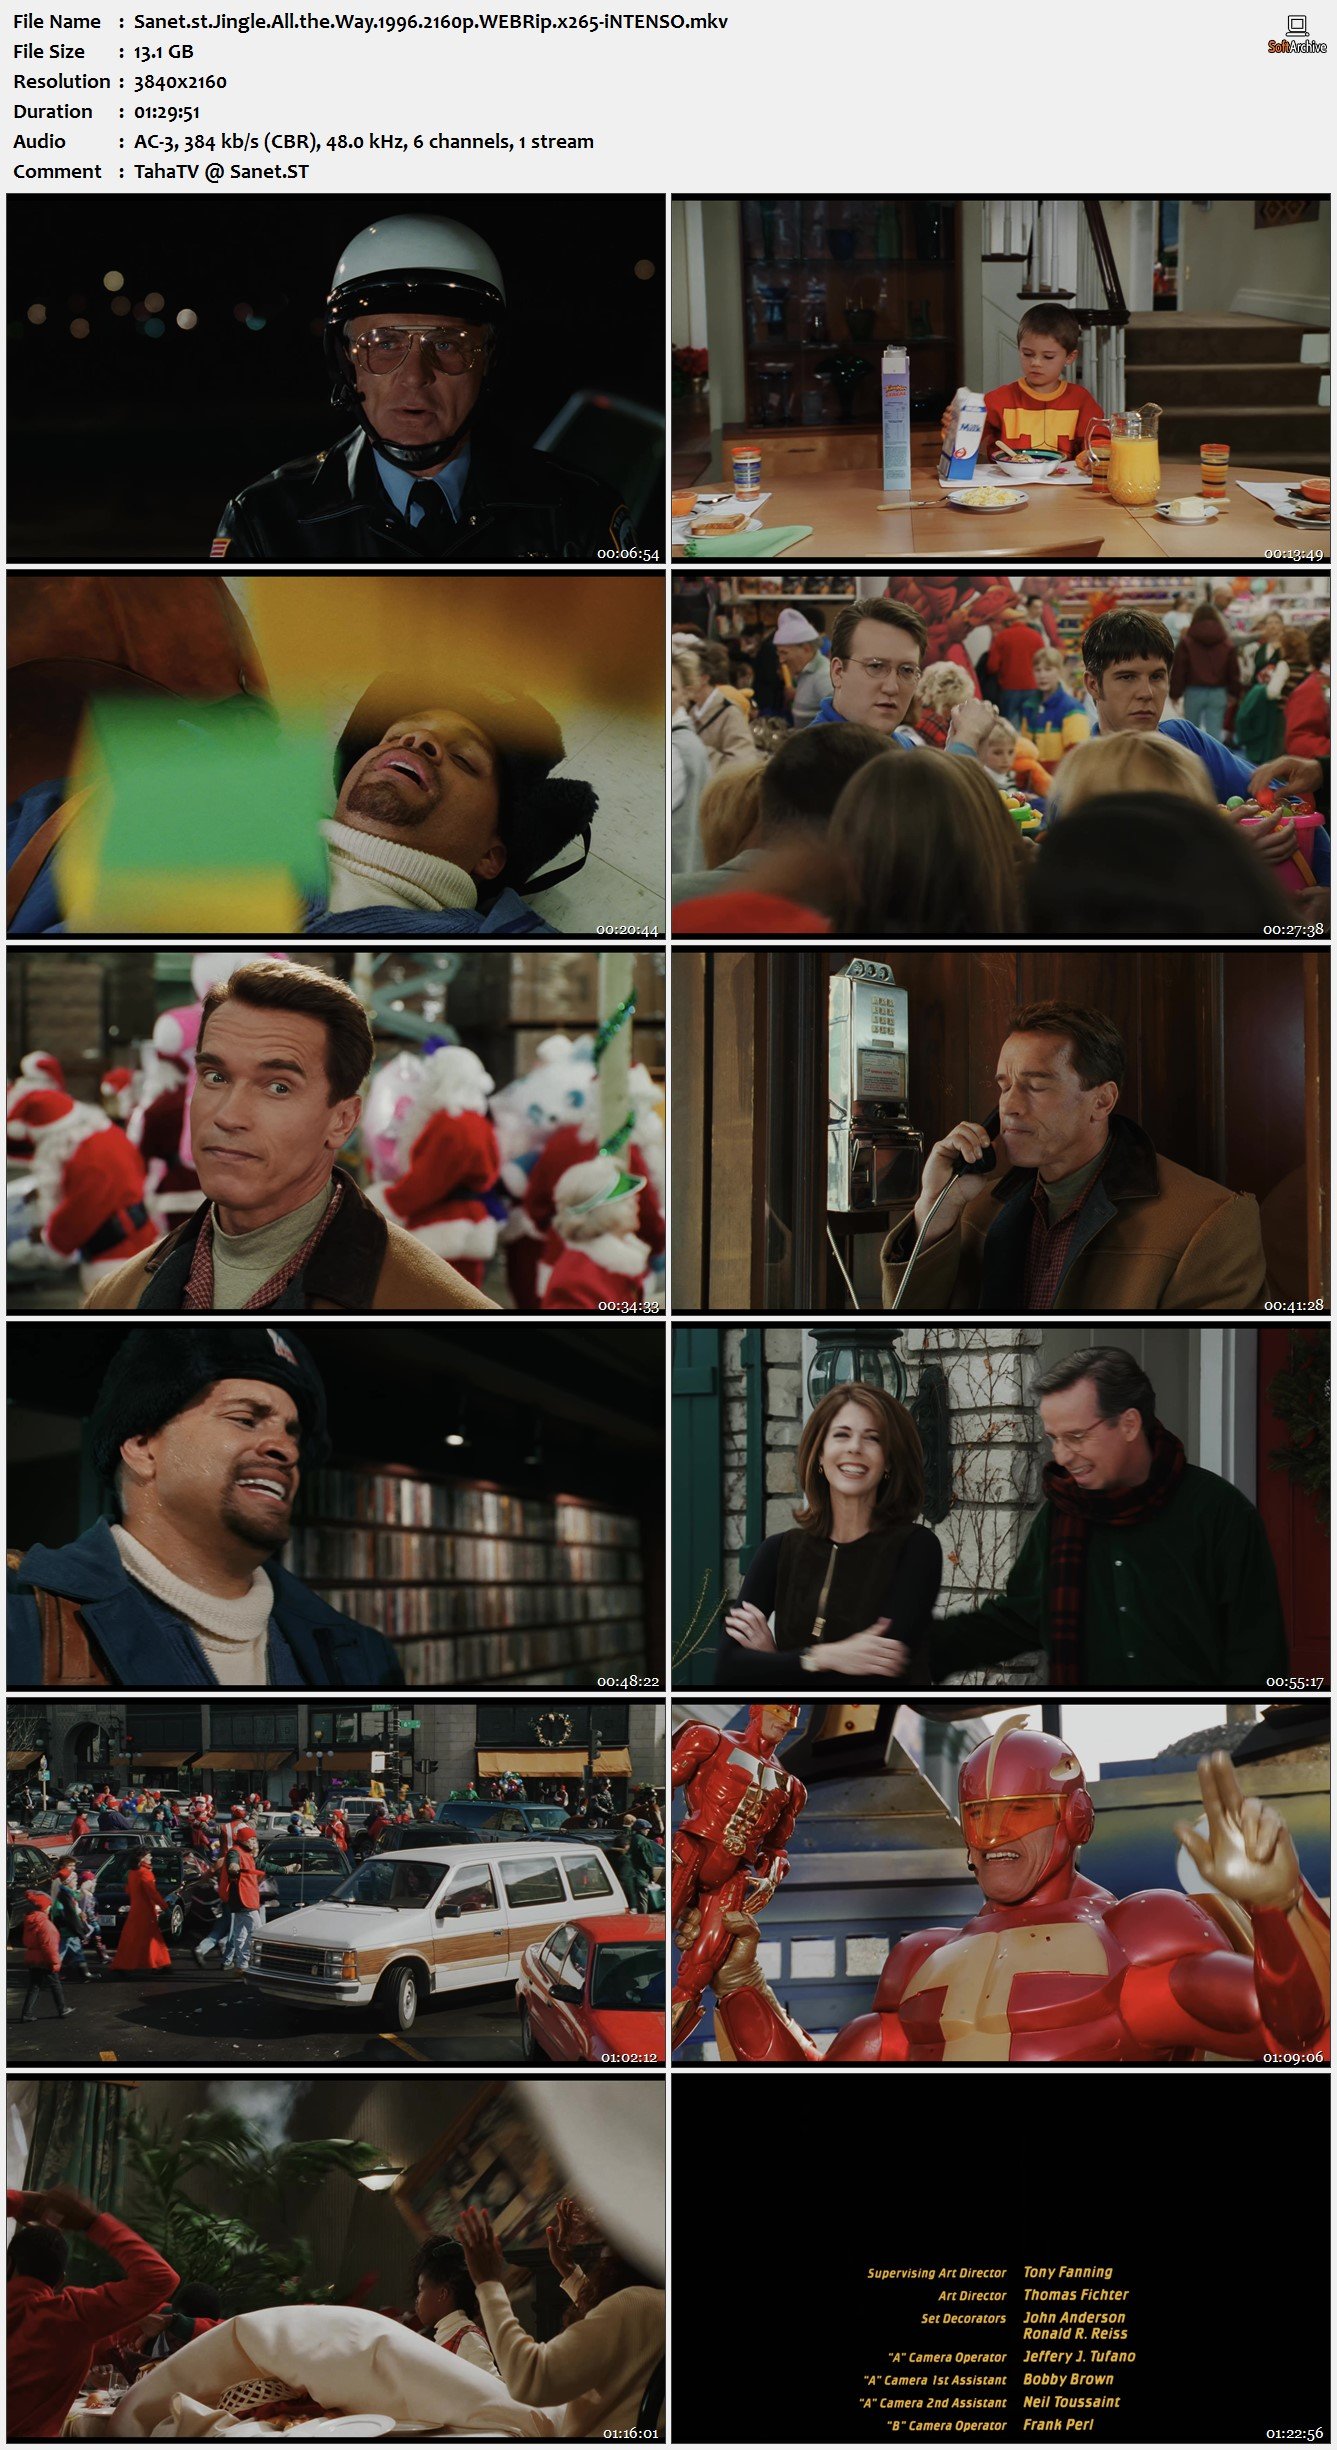 Download Jingle All the Way 1996 2160p WEBRip x265-iNTENSO - SoftArchive